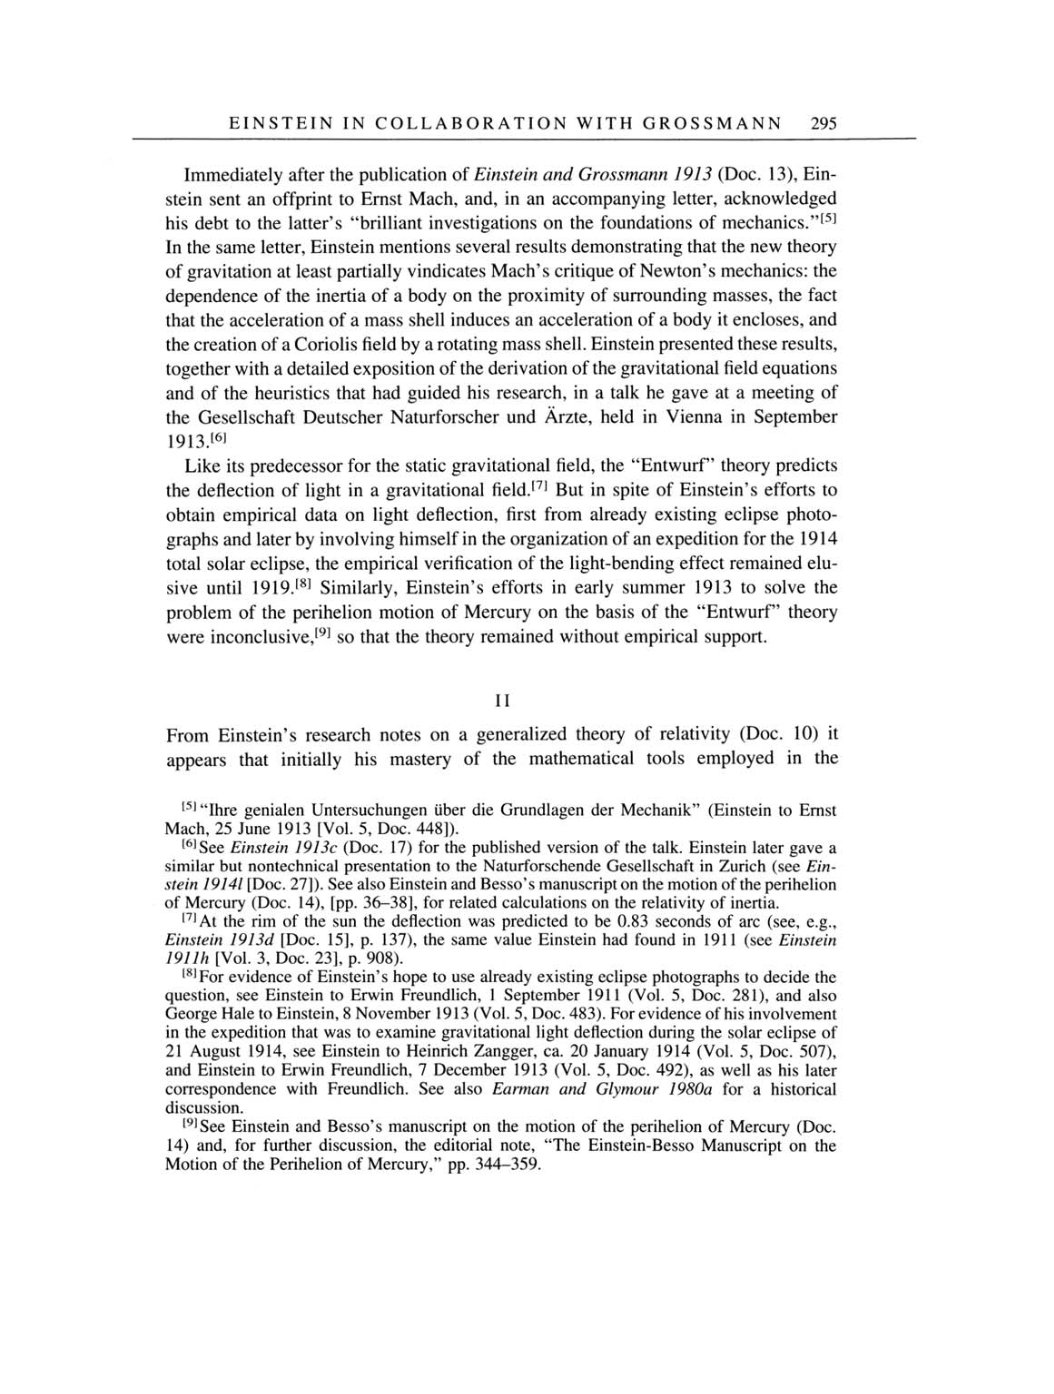 Volume 4: The Swiss Years: Writings 1912-1914 page 295